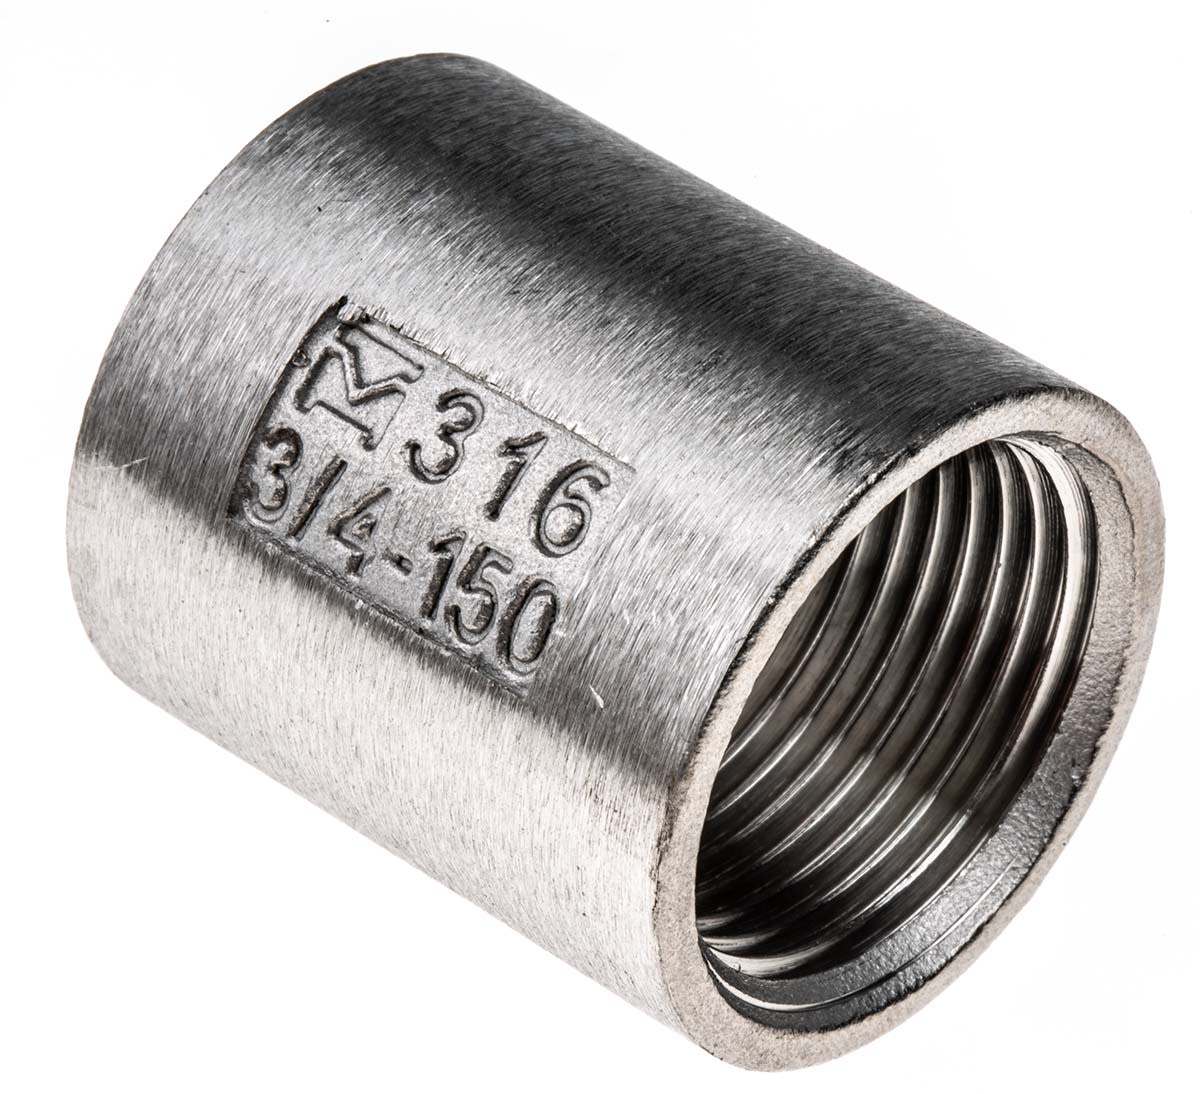 RS PRO Stainless Steel Pipe Fitting Socket, Female G 3/4in x Female G 3/4in